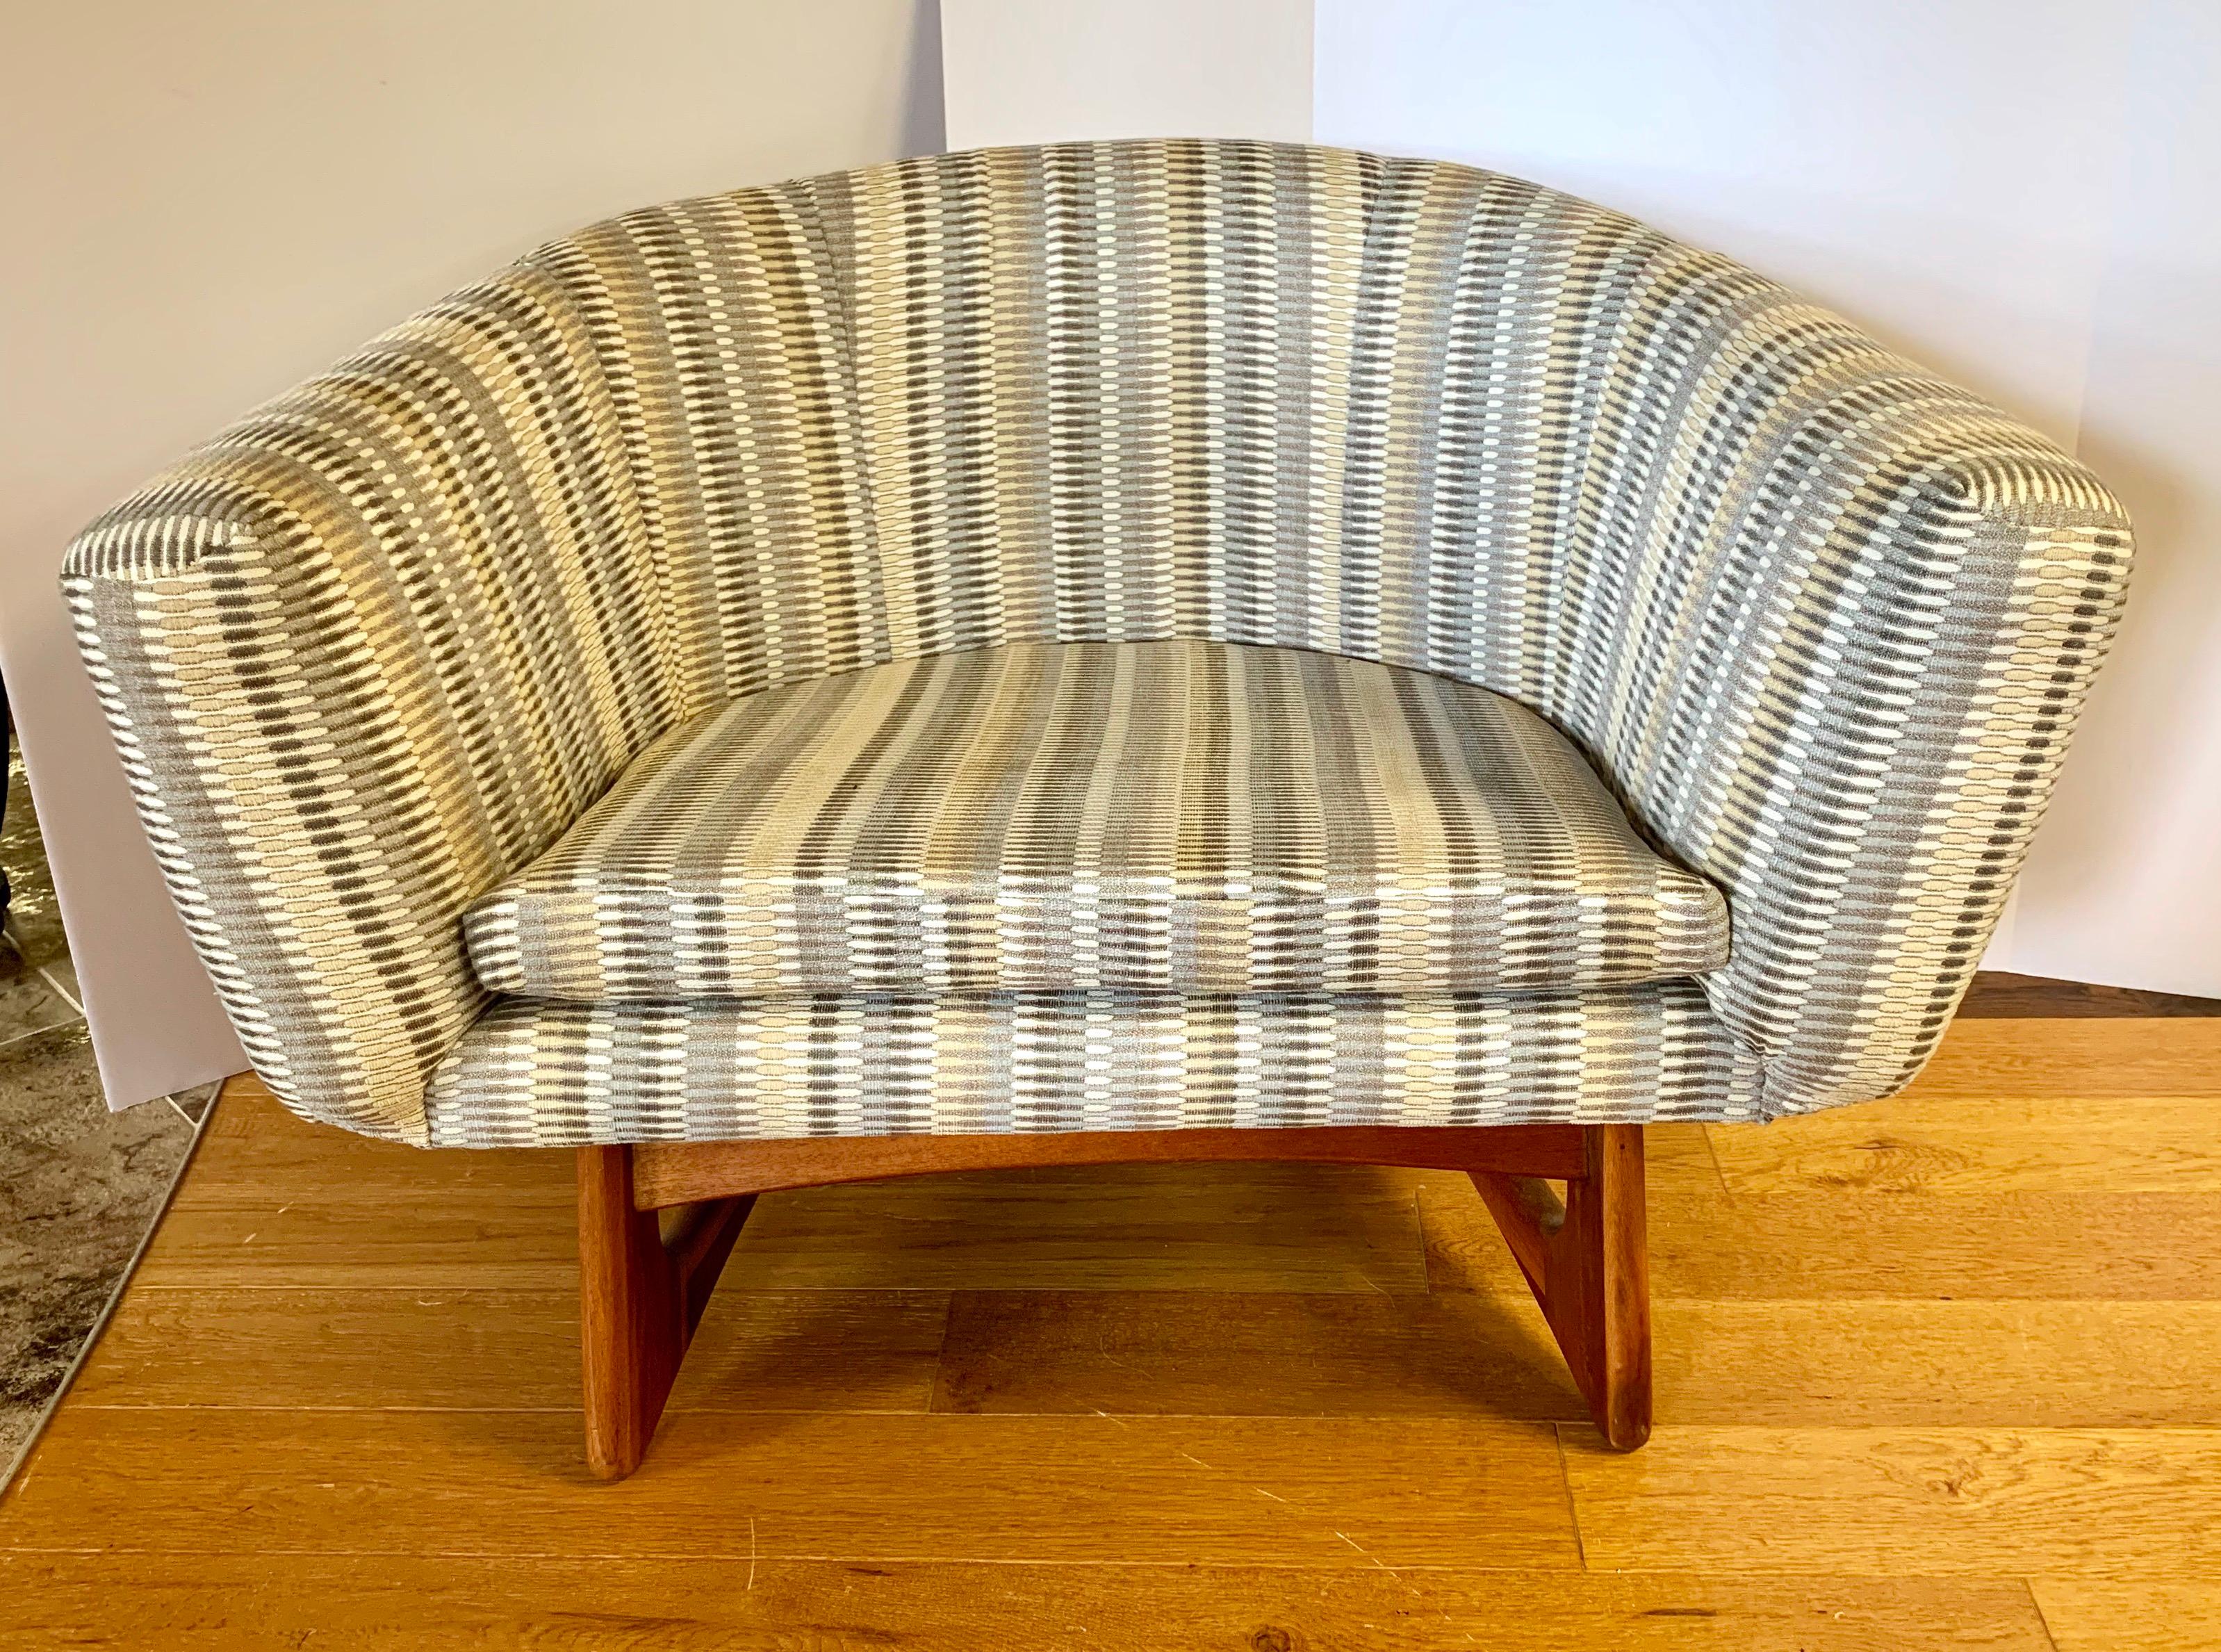 Magnificent period Adrian Pearsall lounge chair with new upholstery. Completely refurbished for the 
21st century. Why not own a classic?